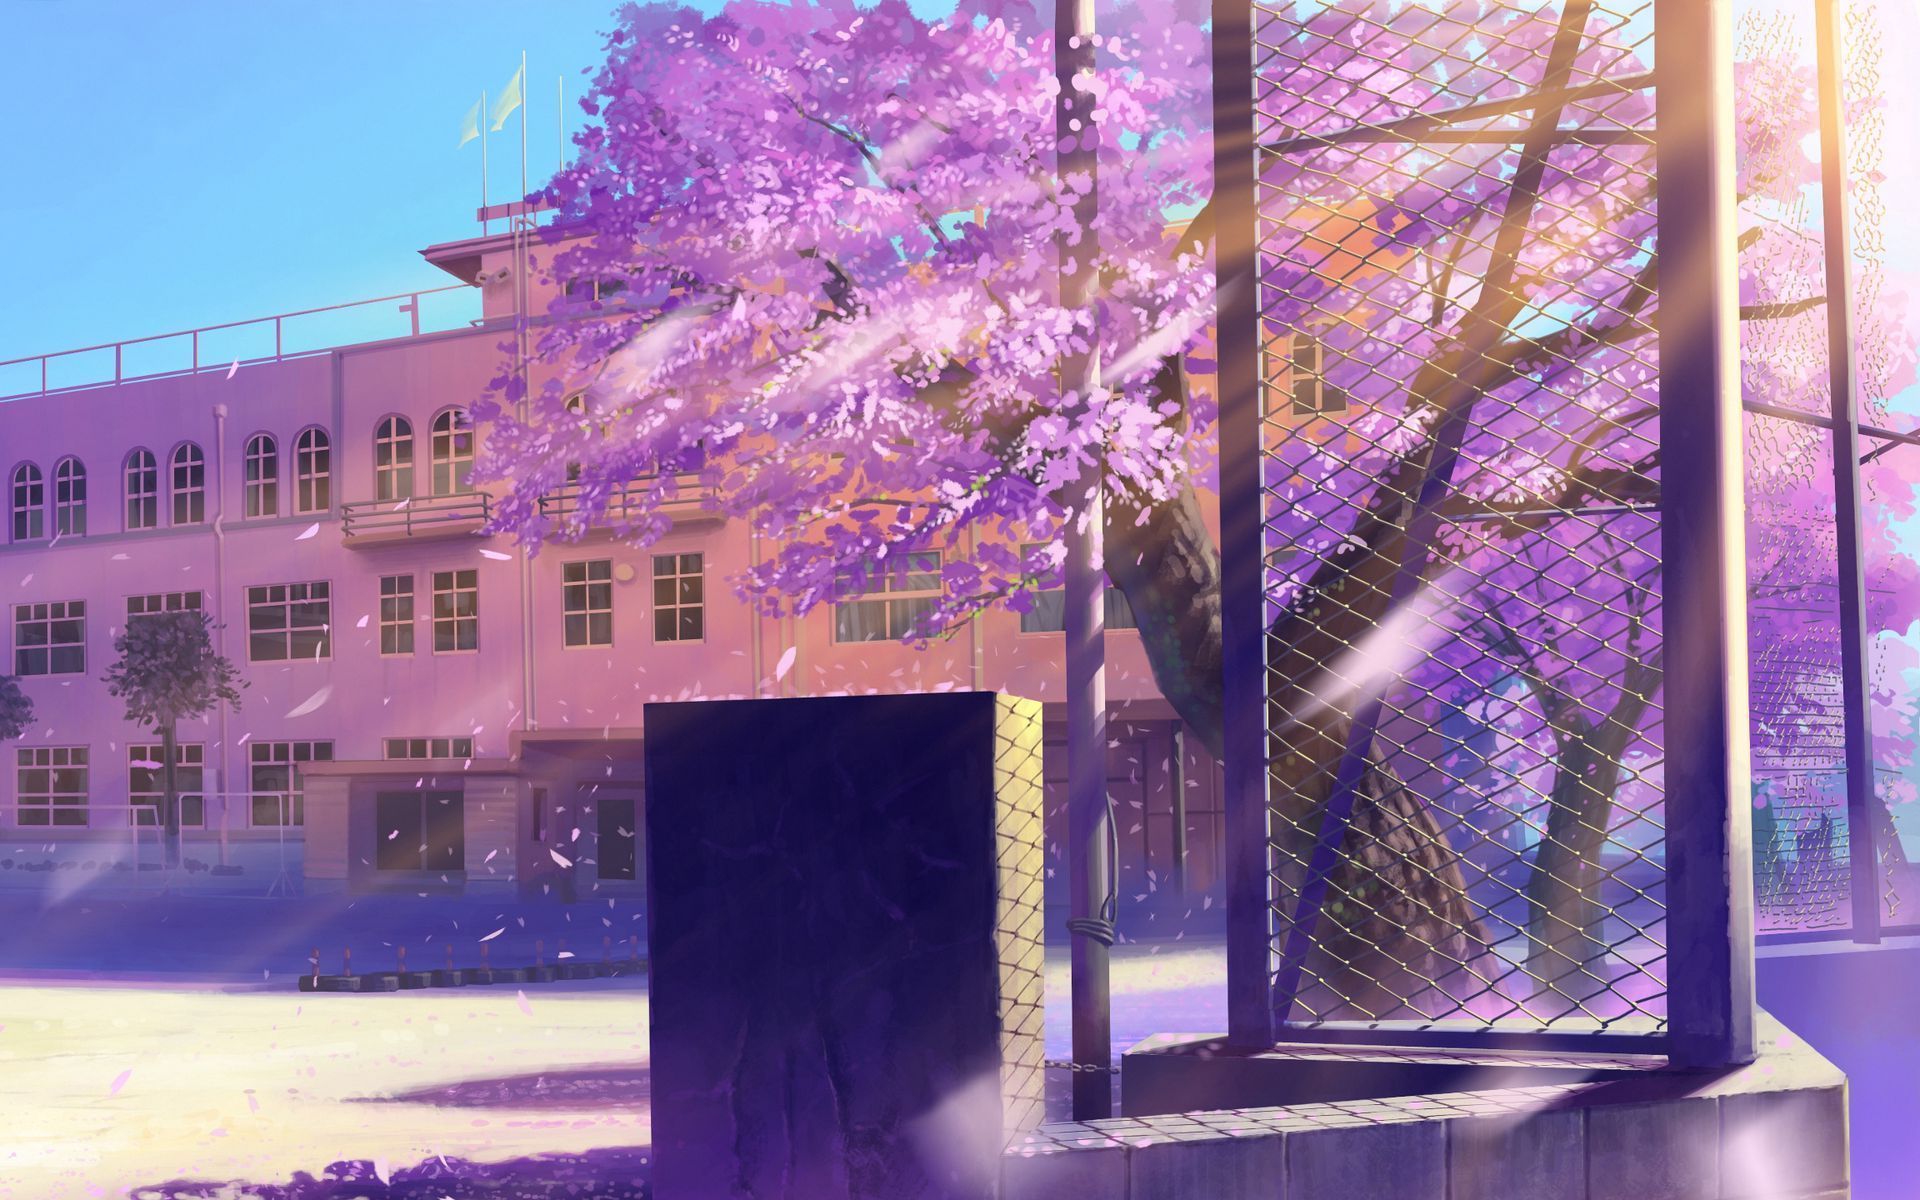 A still from the anime film '5 Centimeters Per Second' showing a tree in blossom in front of a school building - 1920x1200, school